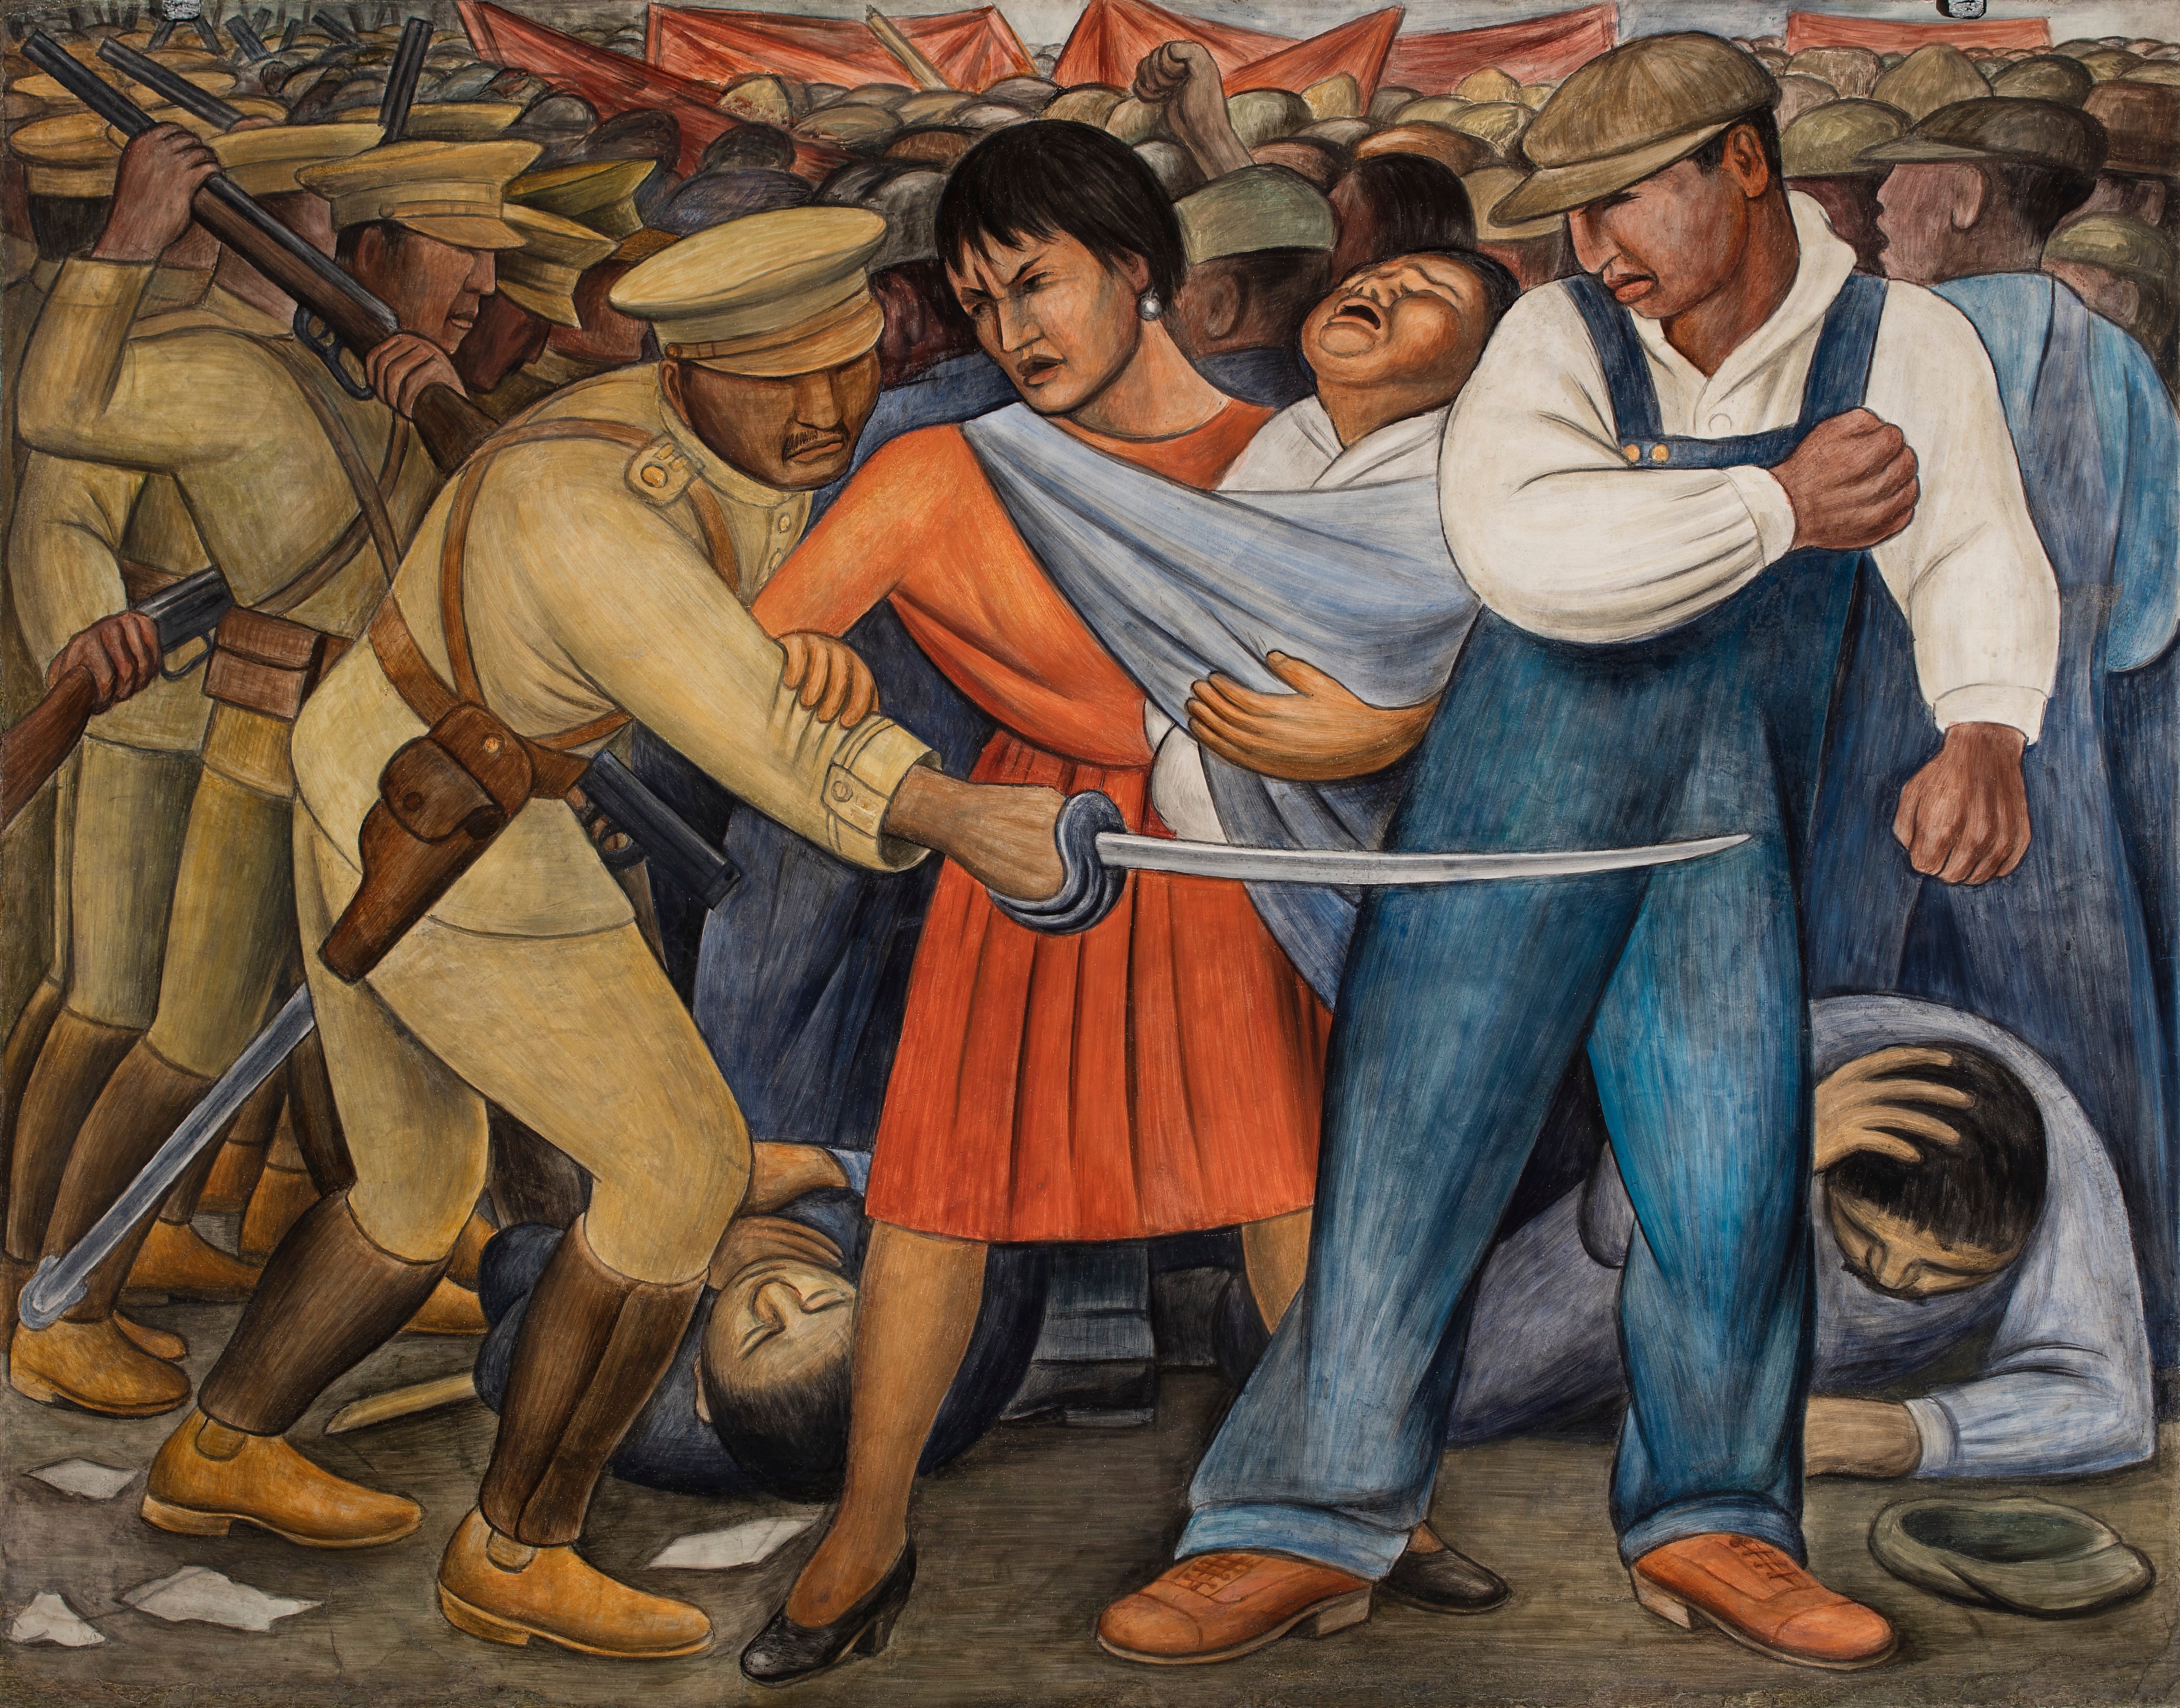 Were the Mexican Muralists America's Greatest Street Artists? A New